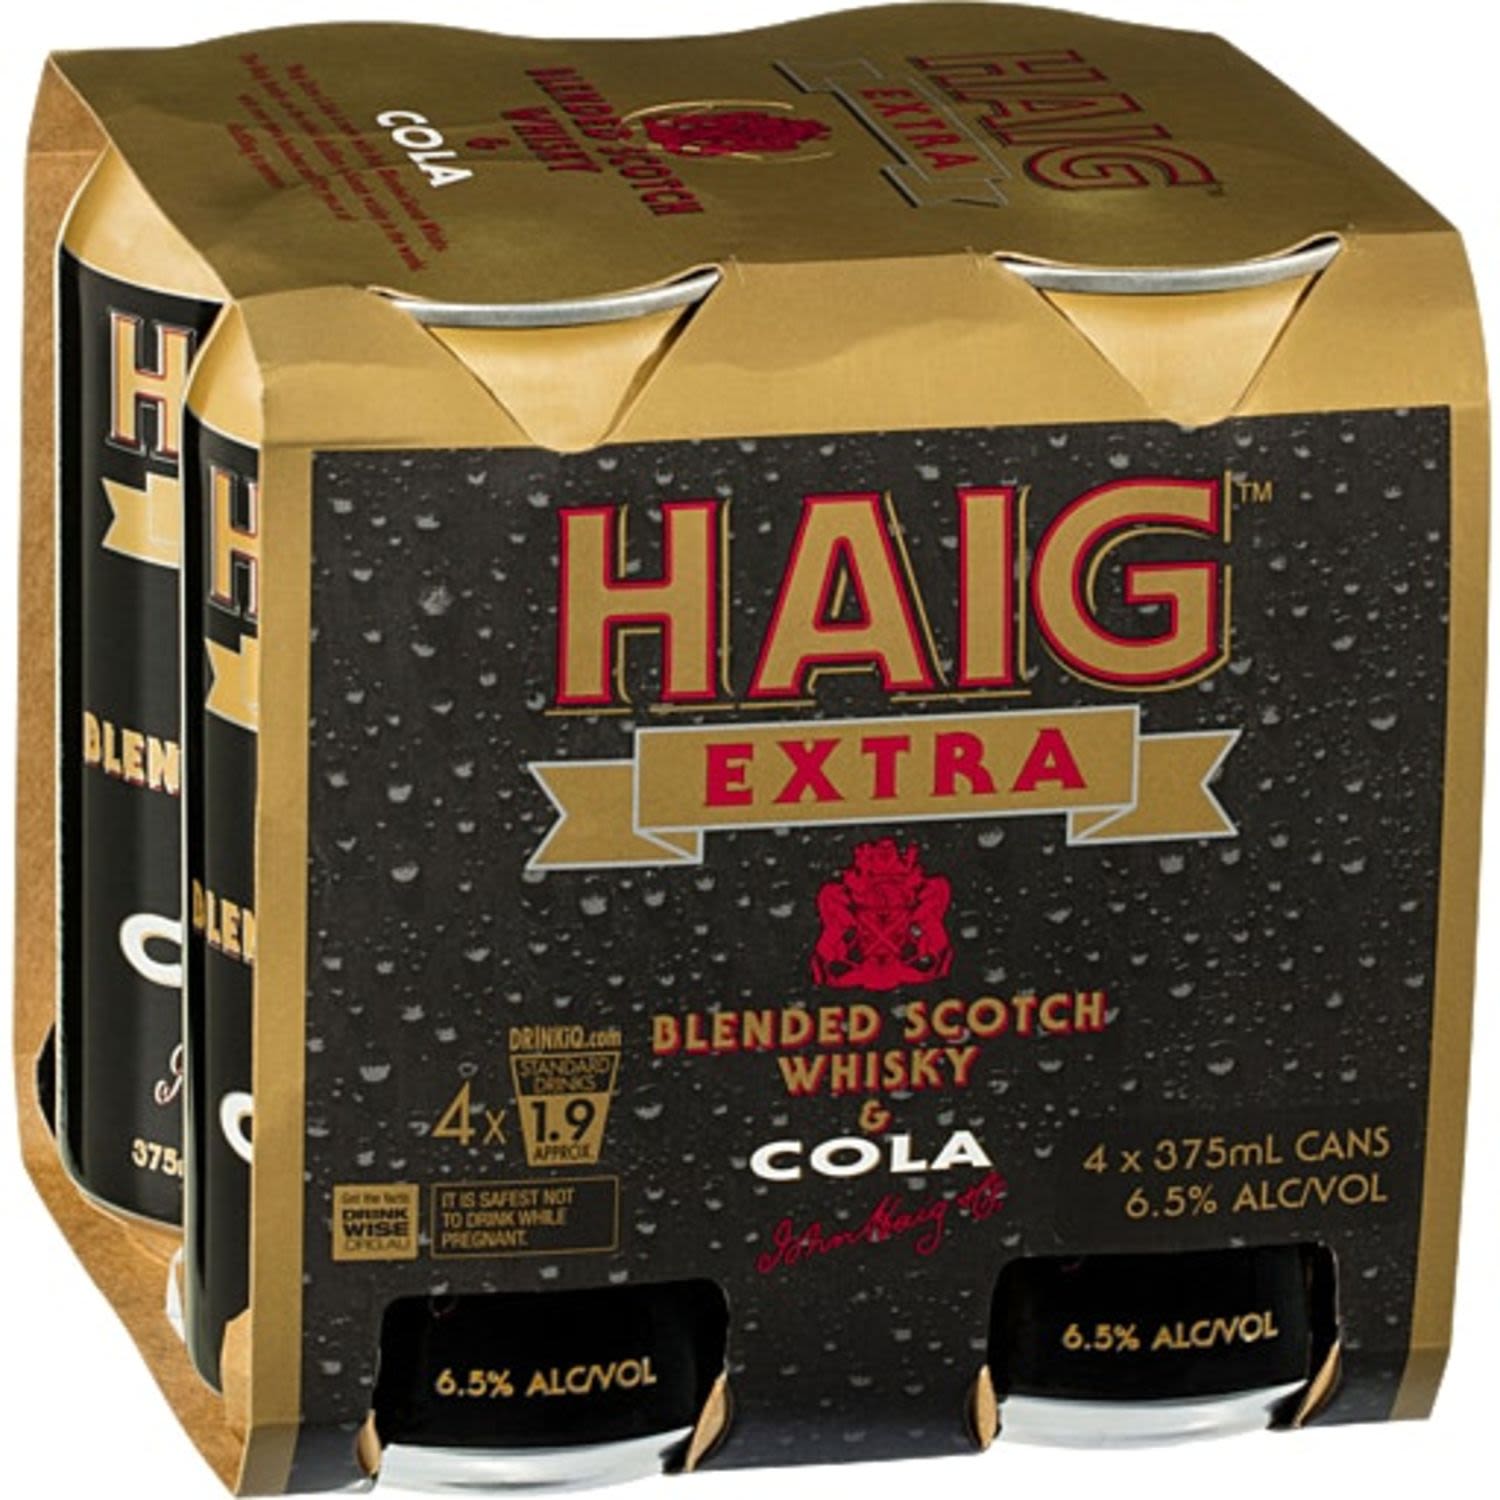 Haig Extra Blended Scotch Whisky & Cola Can 375mL 4 Pack